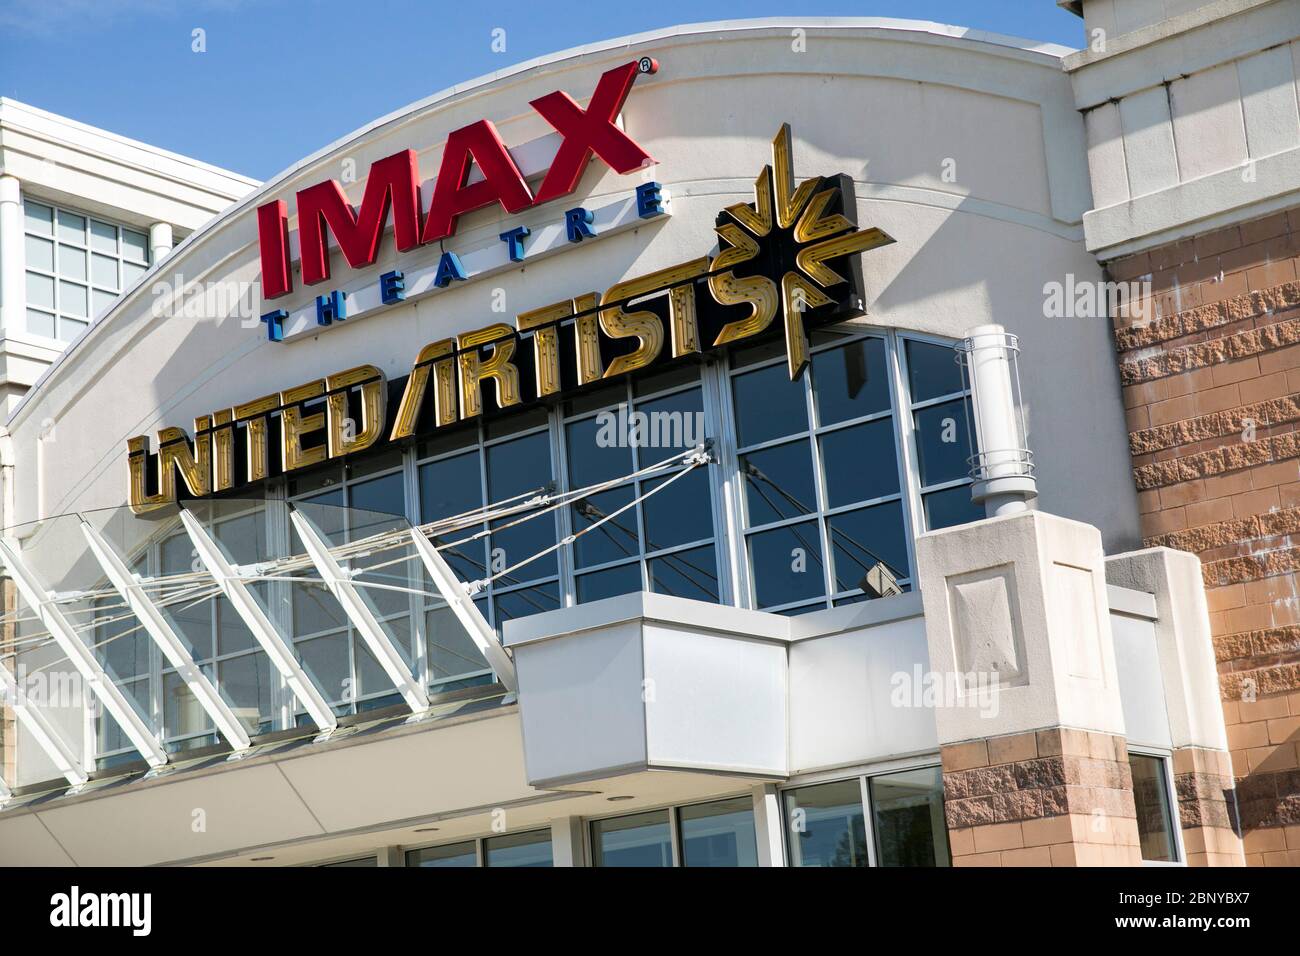 Regal King of Prussia Experience : r/imax